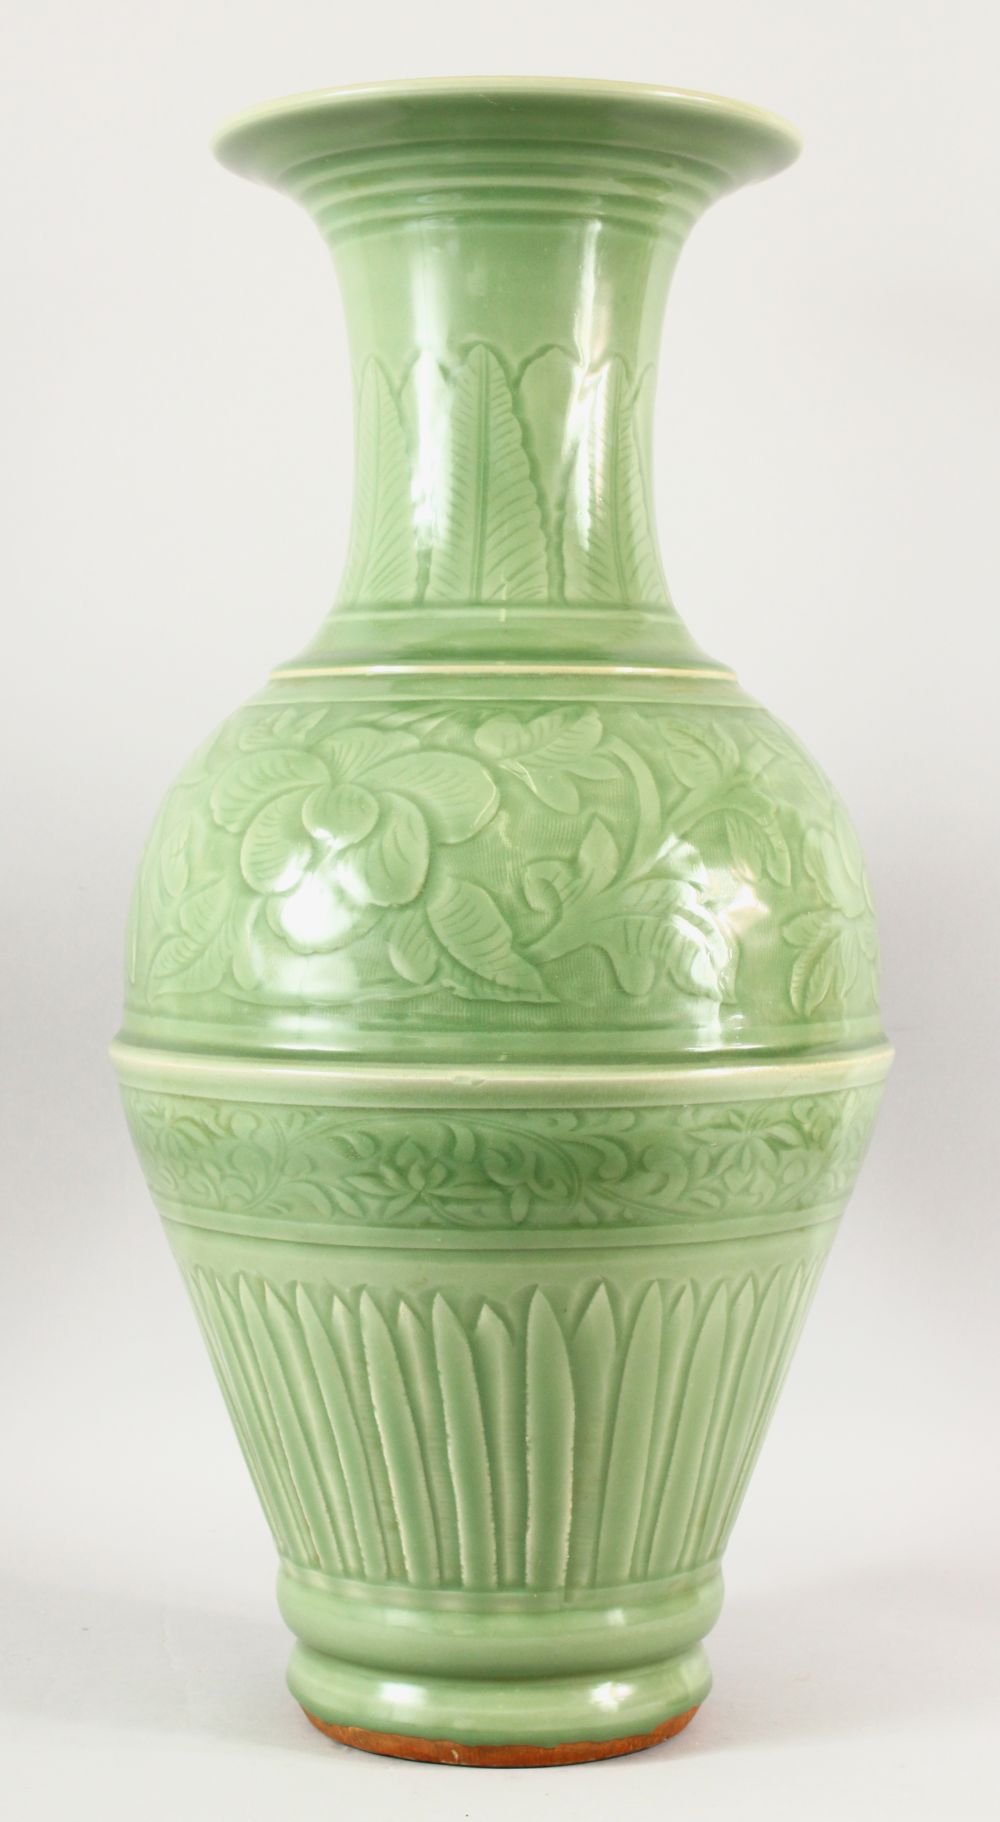 A VERY GOOD LARGE CHINESE CELADON VASE, with panels of flowers and fluted base, 64cm high.